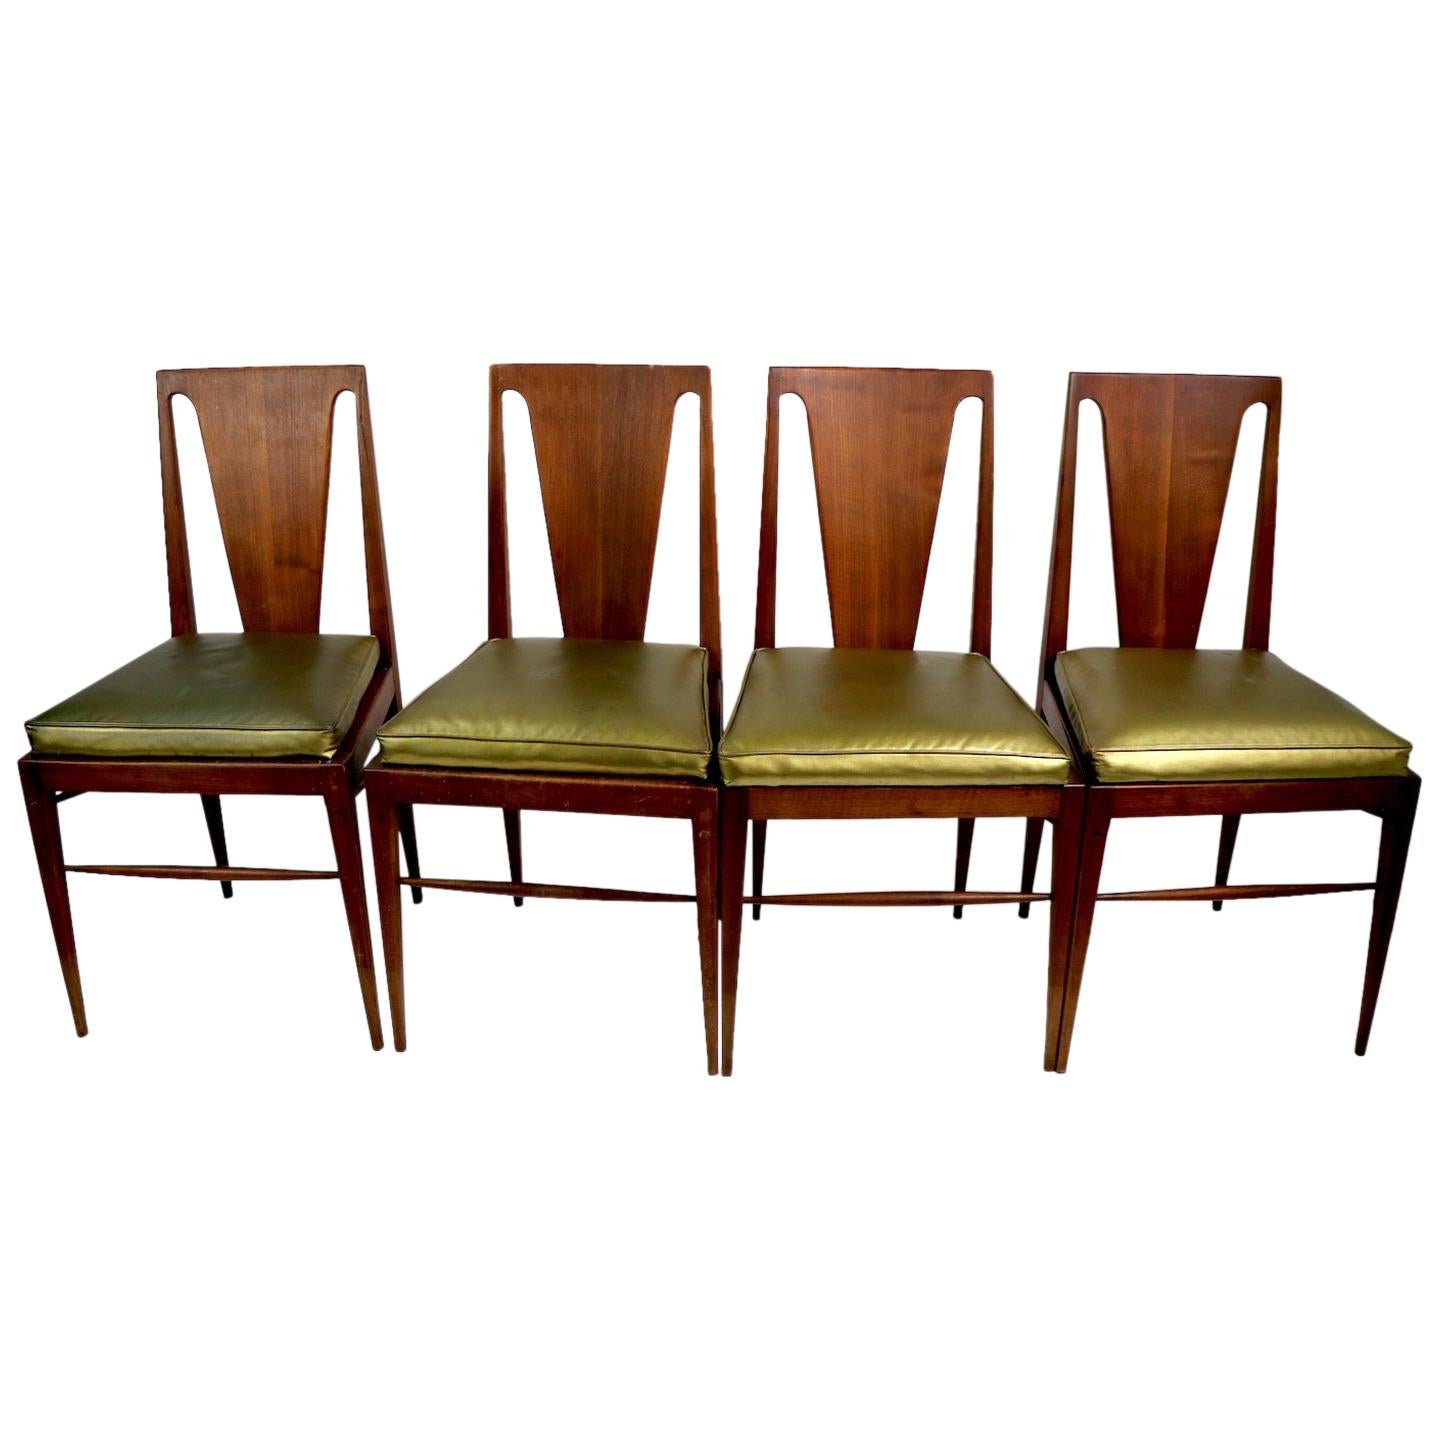 Set of Four Mid Century Dining Chairs Attributed to Harvey Probber